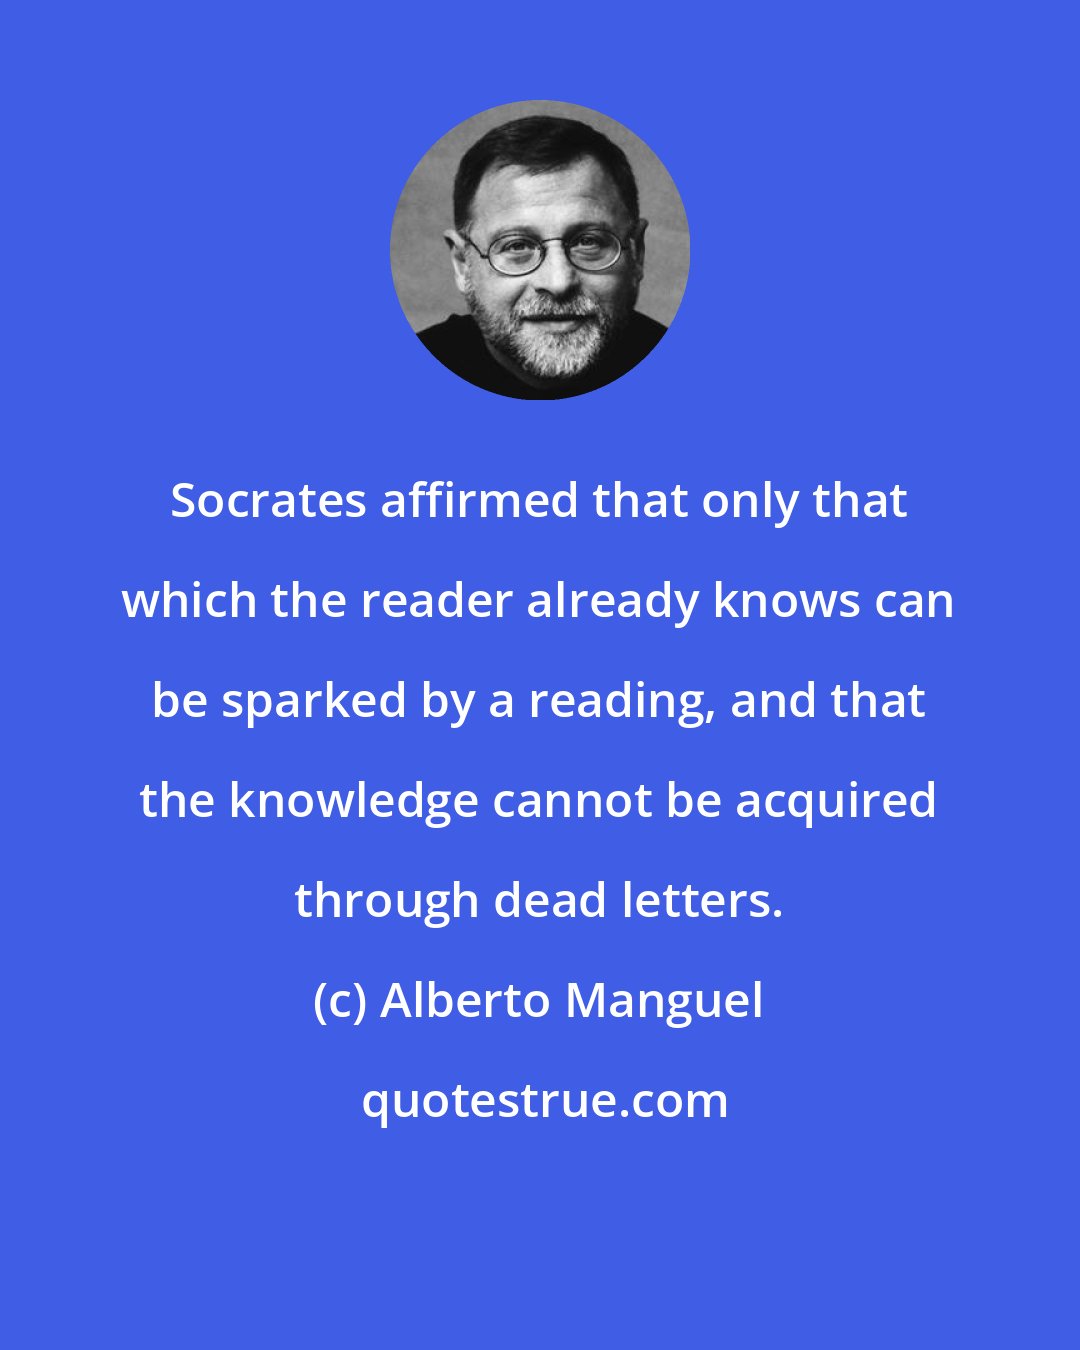 Alberto Manguel: Socrates affirmed that only that which the reader already knows can be sparked by a reading, and that the knowledge cannot be acquired through dead letters.